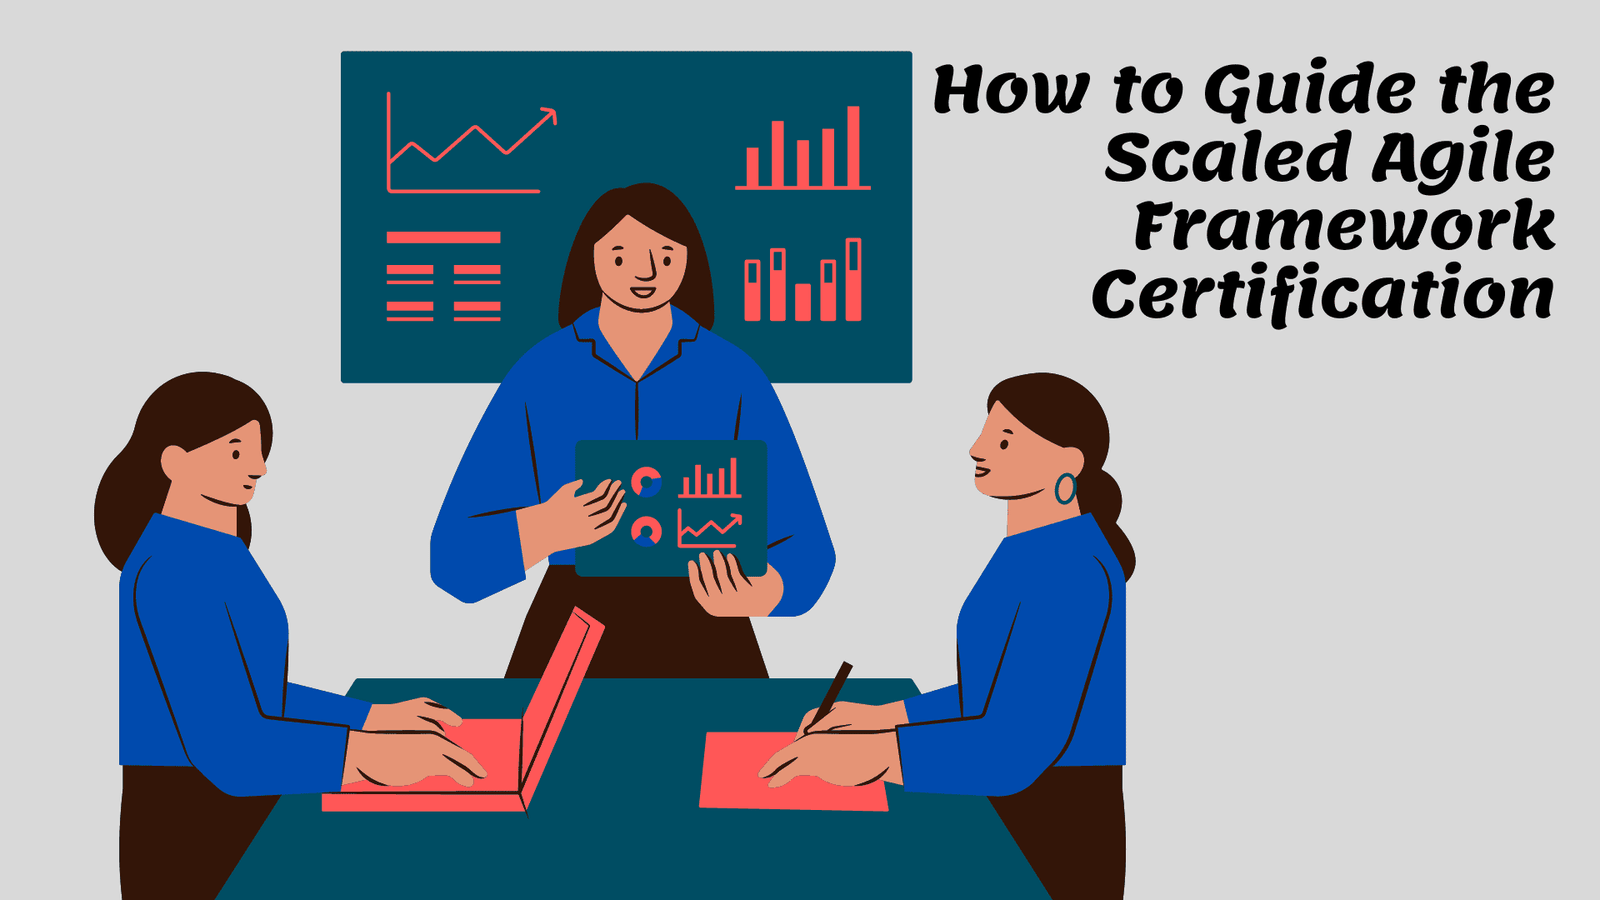 How to Guide the Scaled Agile Framework Certification Image